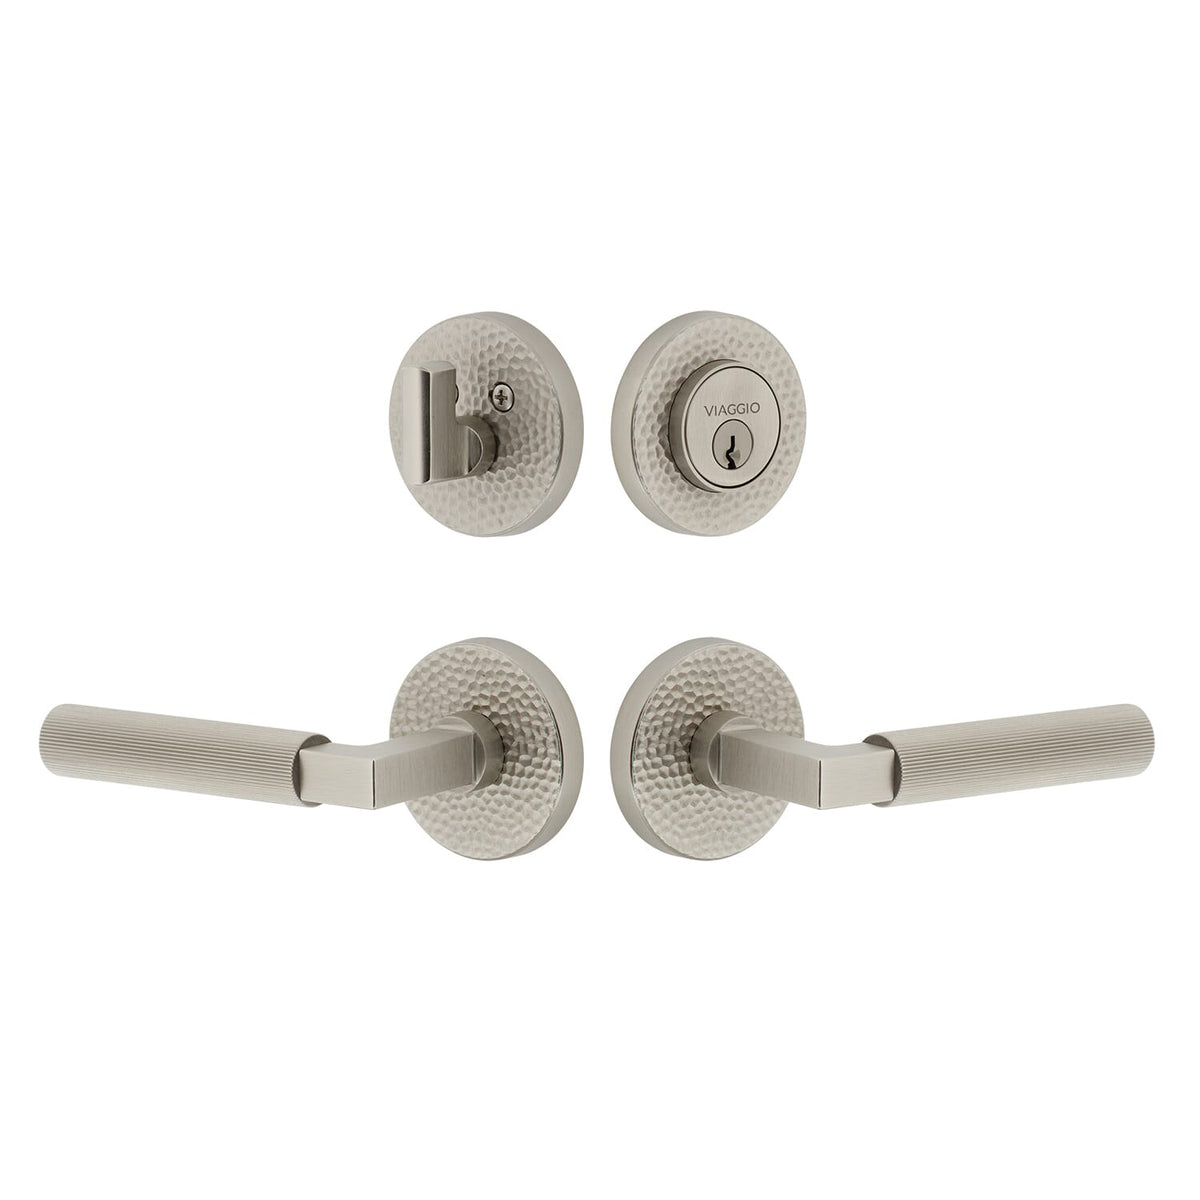 Circolo Hammered Rosette Entry Set with Contempo Fluted Lever  in Satin Nickel